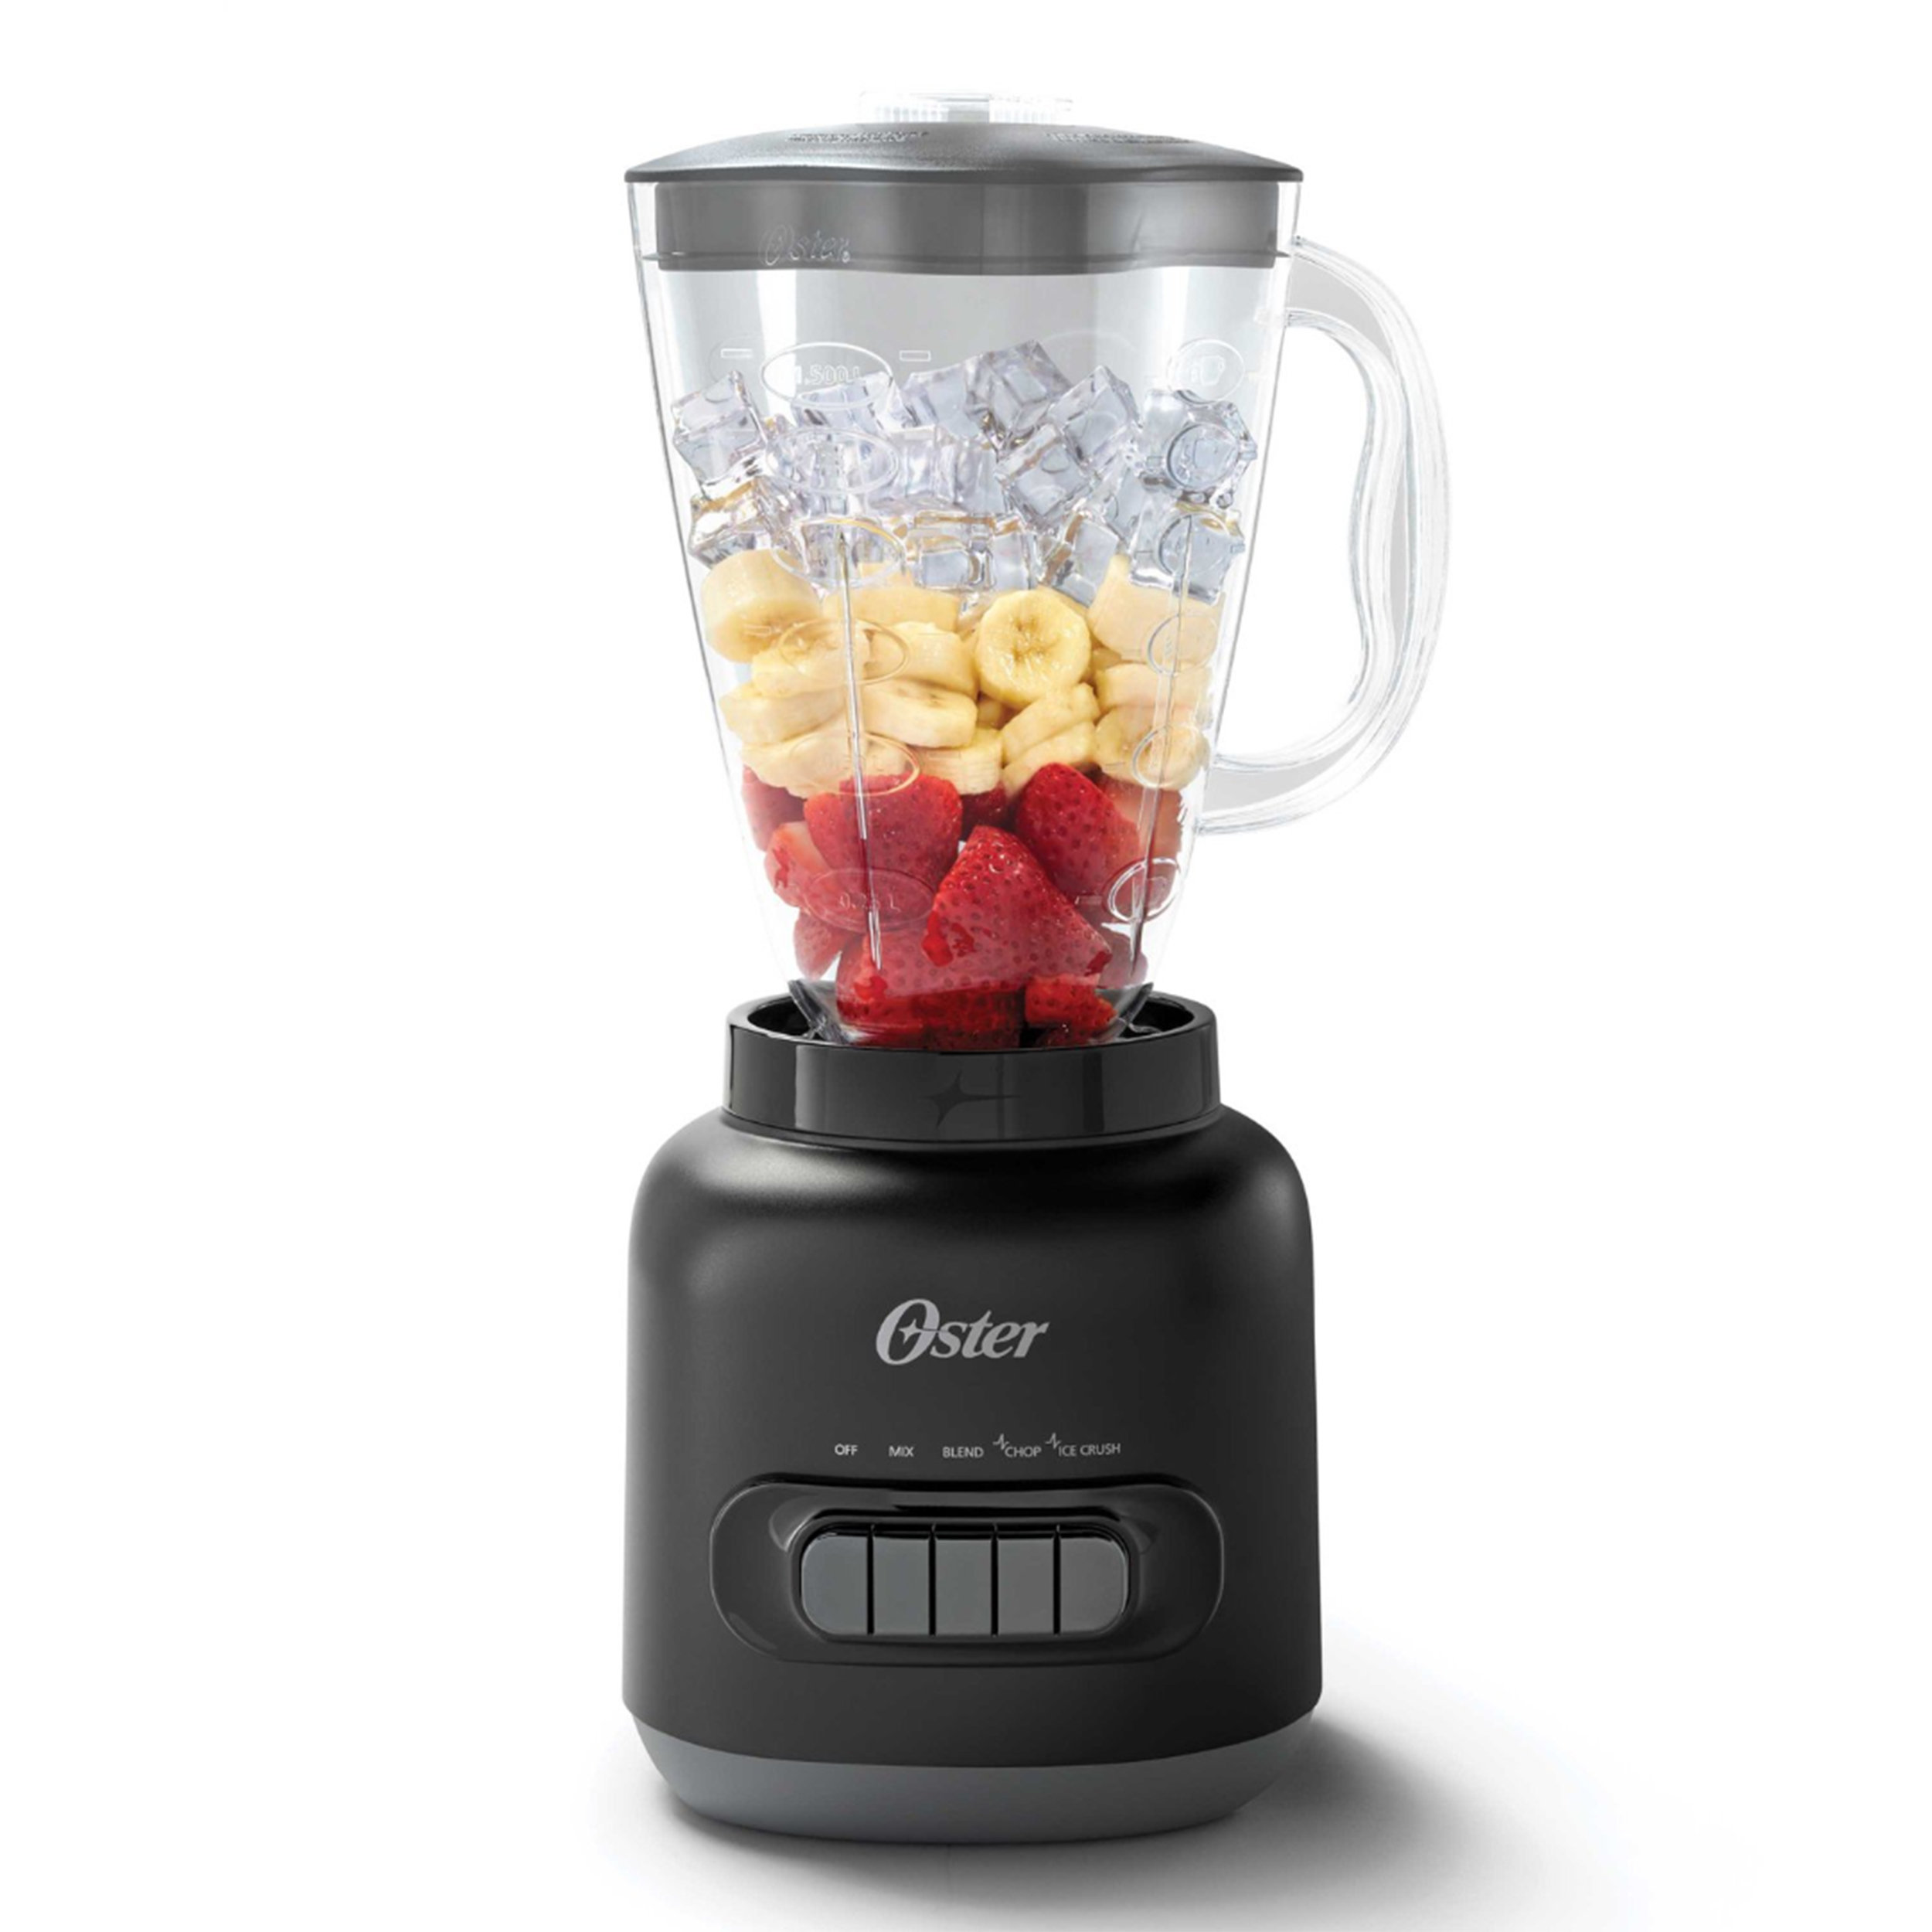 Farberware blender with 6 cup glass pitcher and